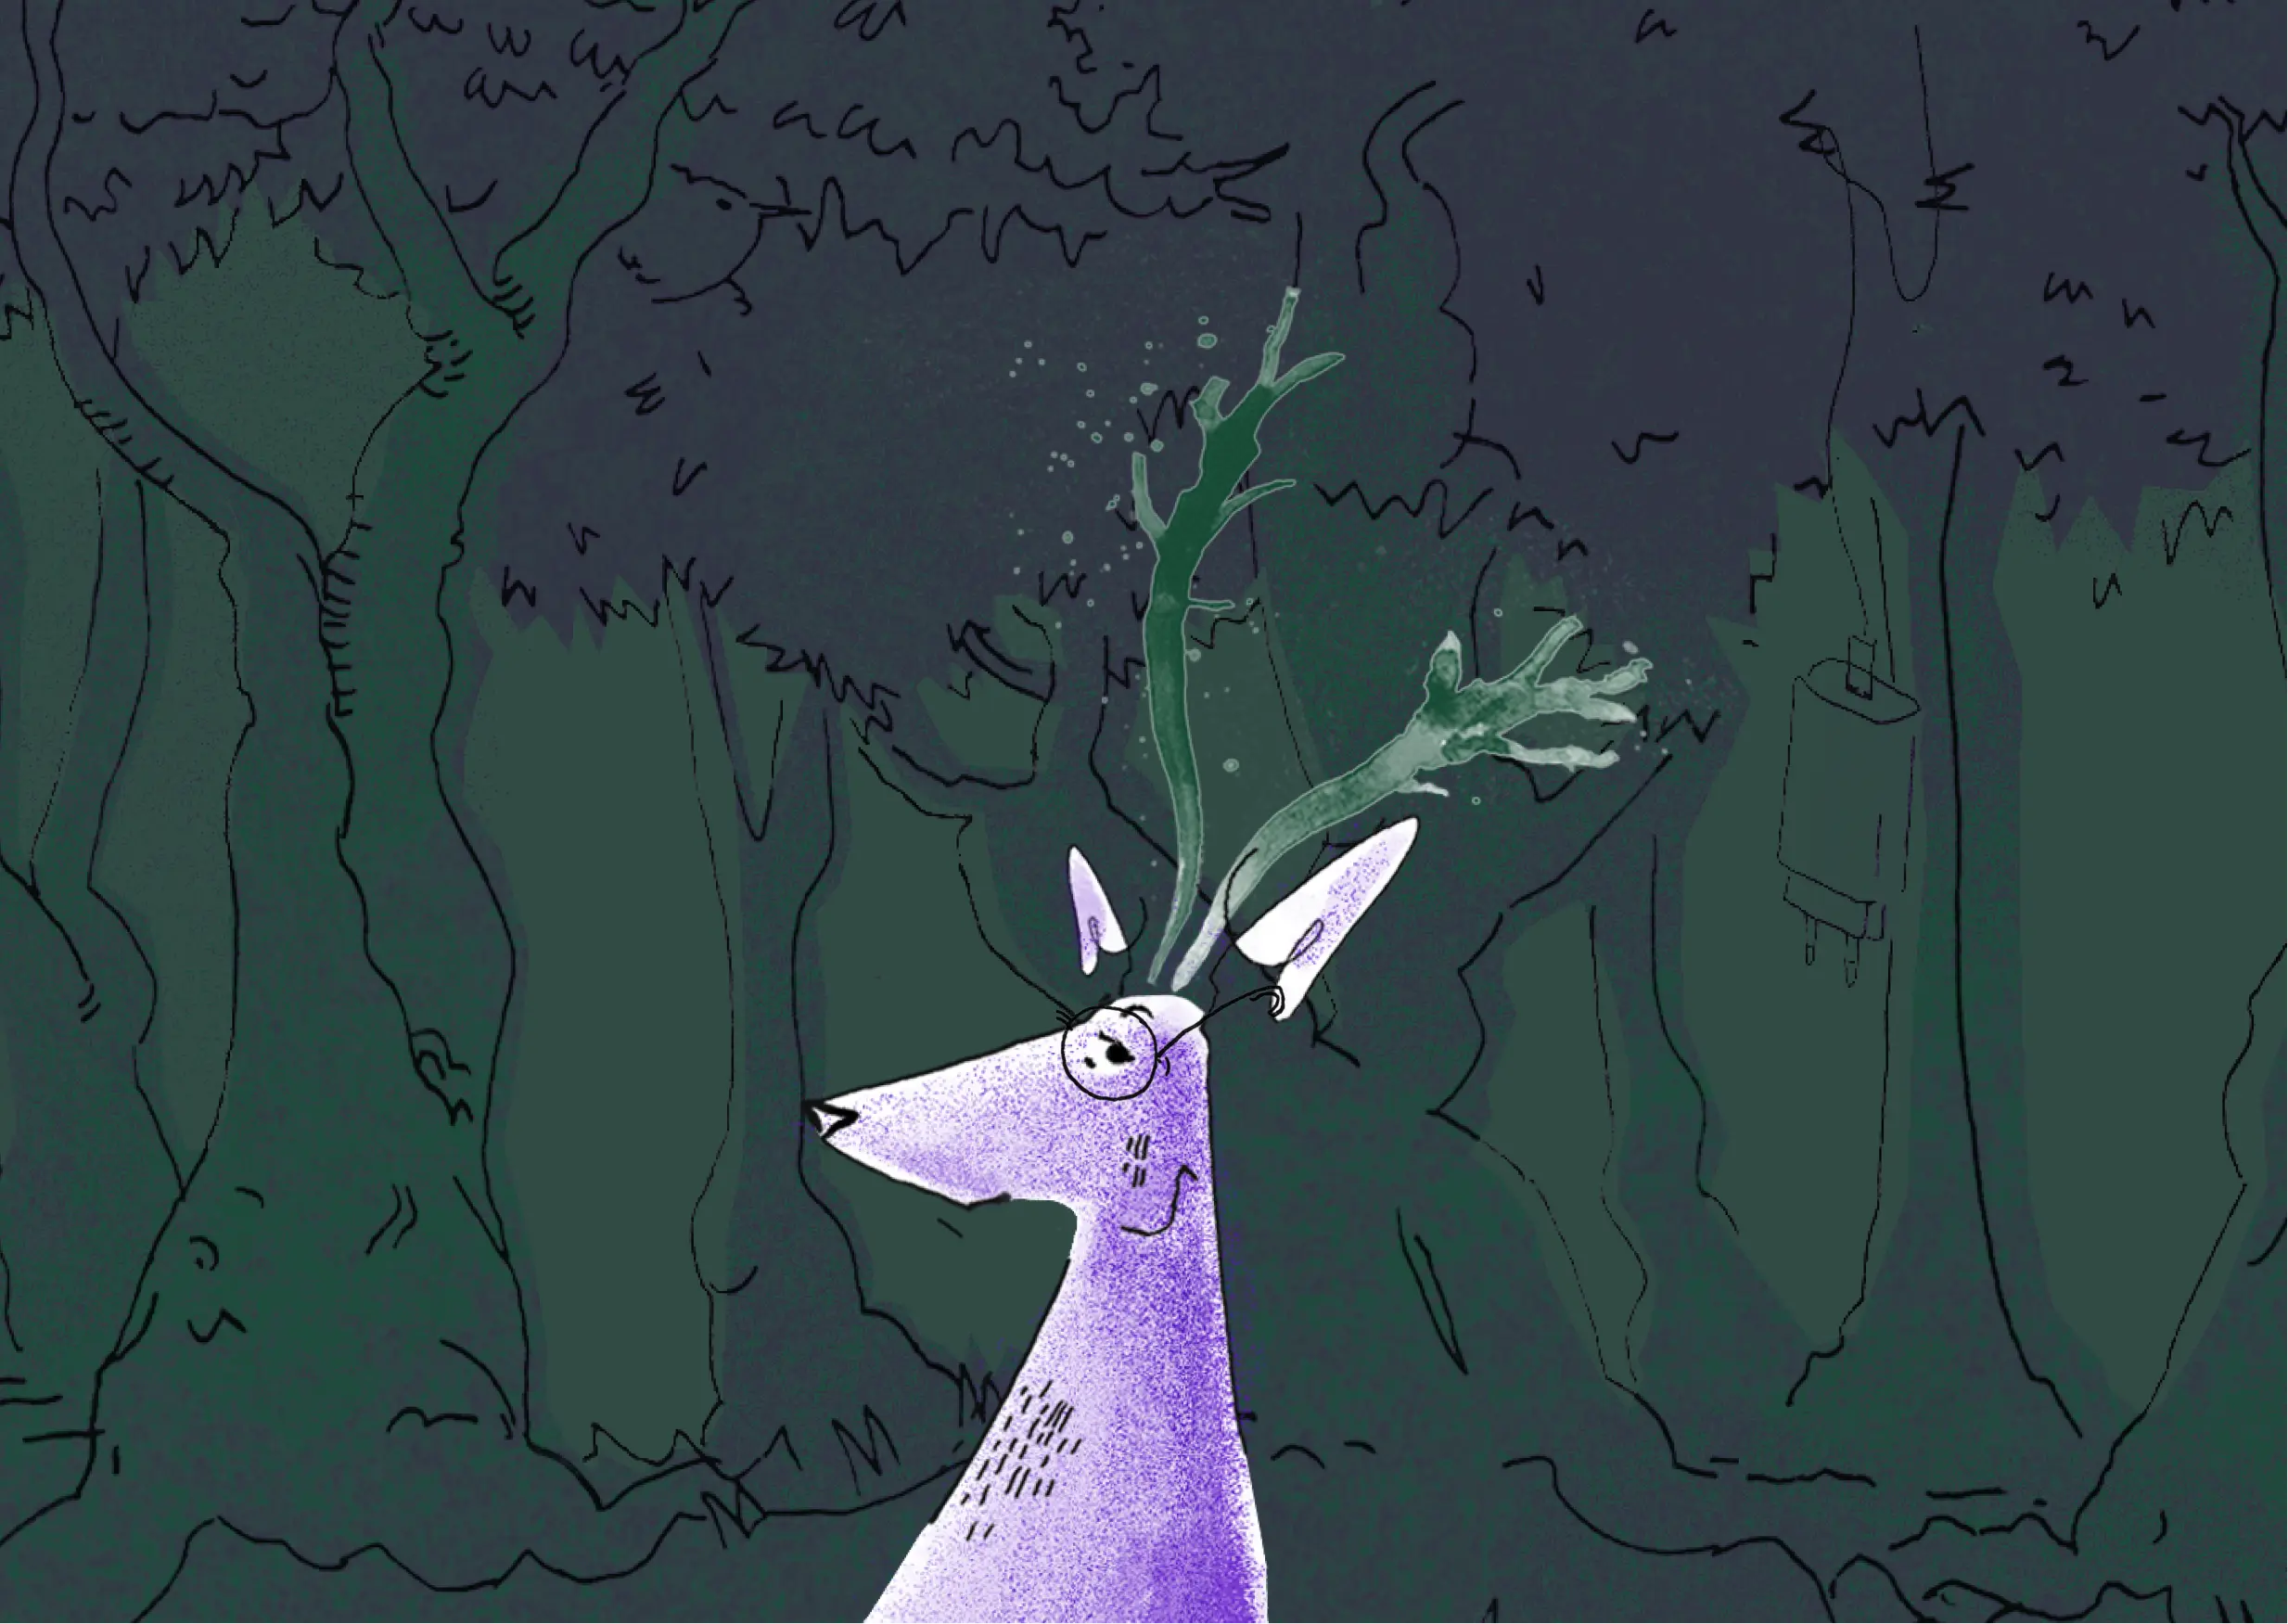 Cartoon portrait of a purple deer with glasses and green antlers. The deer looks at the camera and pricks up its ears. In the background is a sketch of a dense forest.